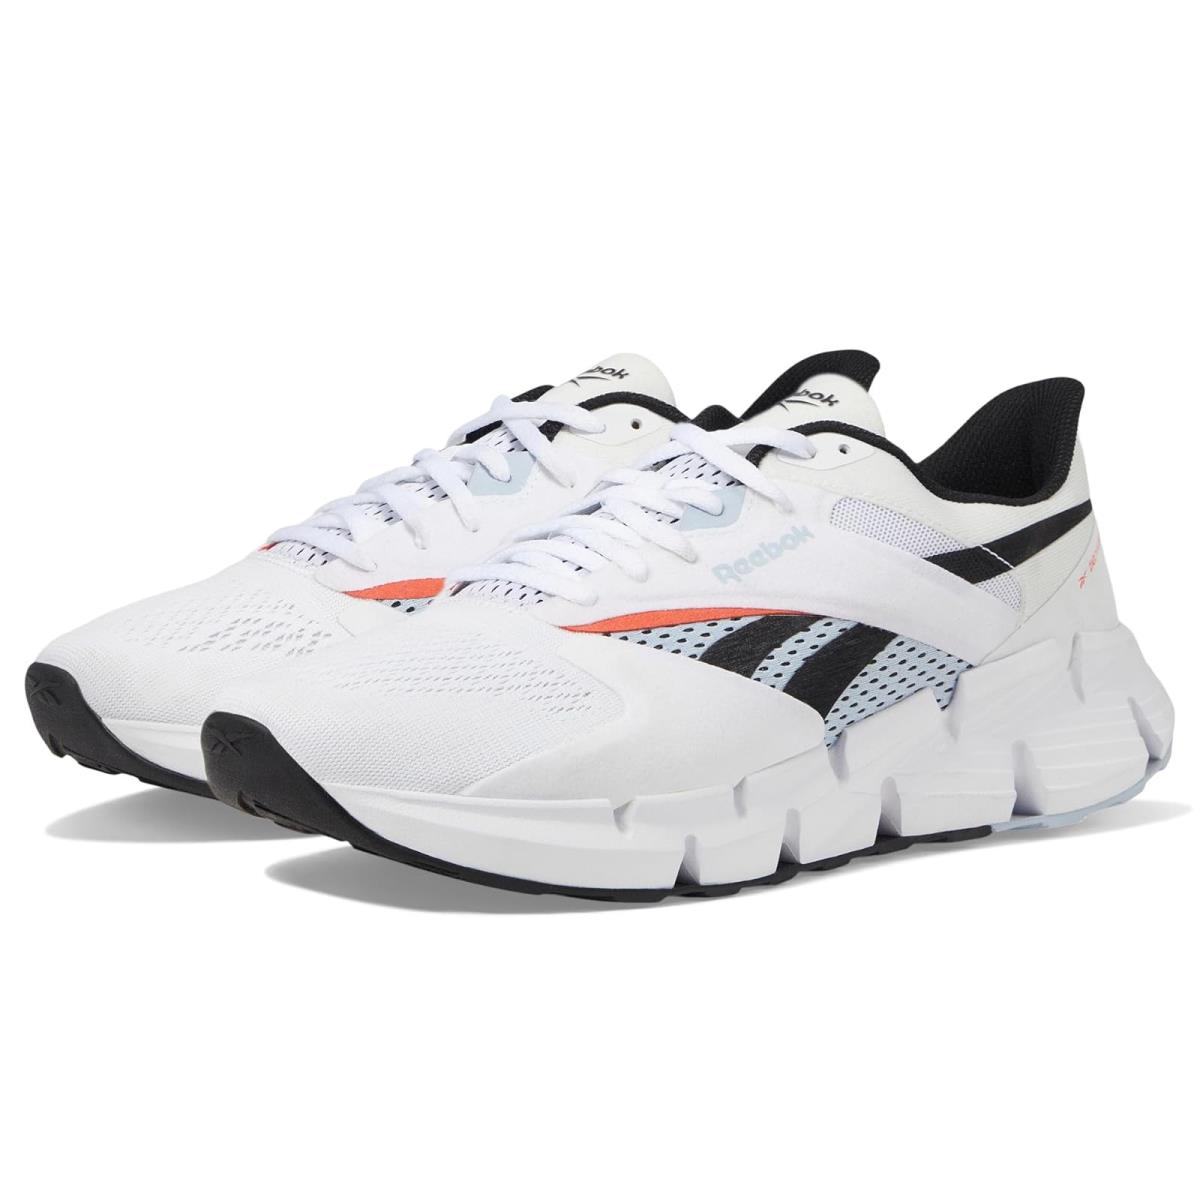 Unisex Sneakers Athletic Shoes Reebok Zig Dynamica 5 White/Black/Red